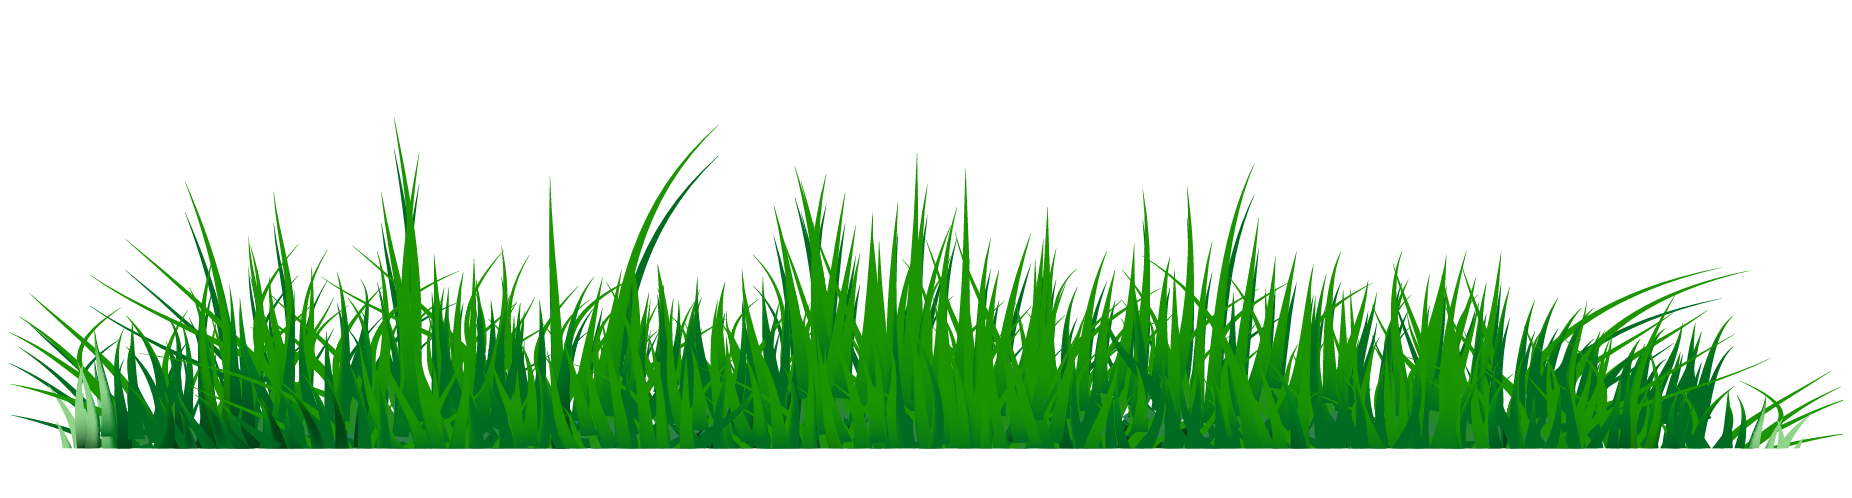 Png images a live. Grass clipart food